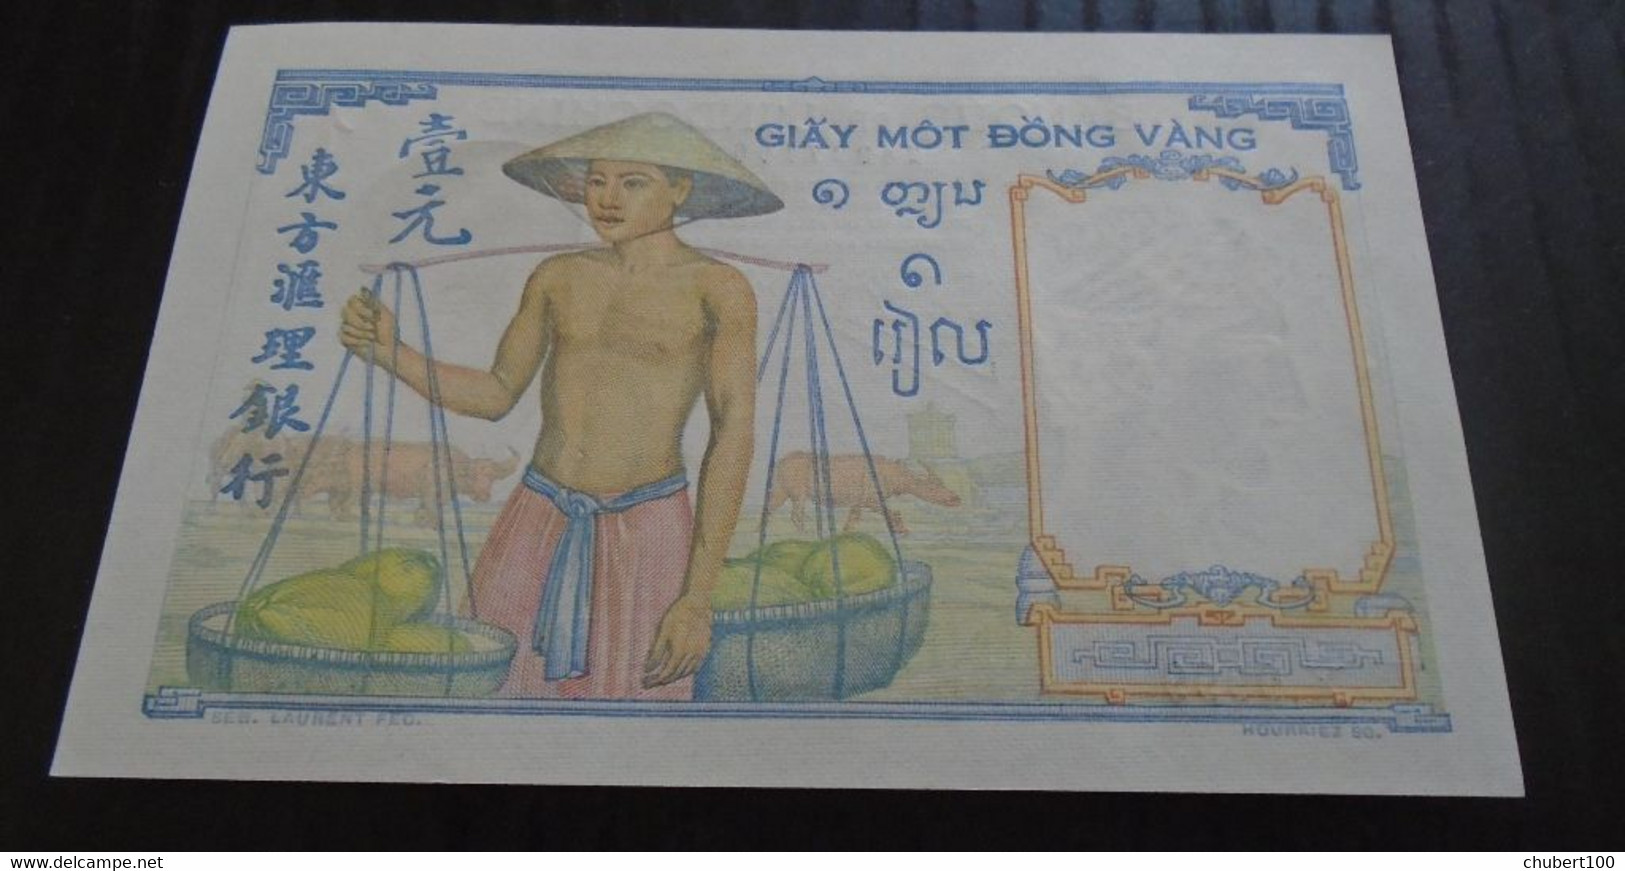 FRENCH INDOCHINA , P 54e , 1 Piastre , ND 1949, UNC Neuf , Solid Lucky Numbers: 9999 777 - Indochina